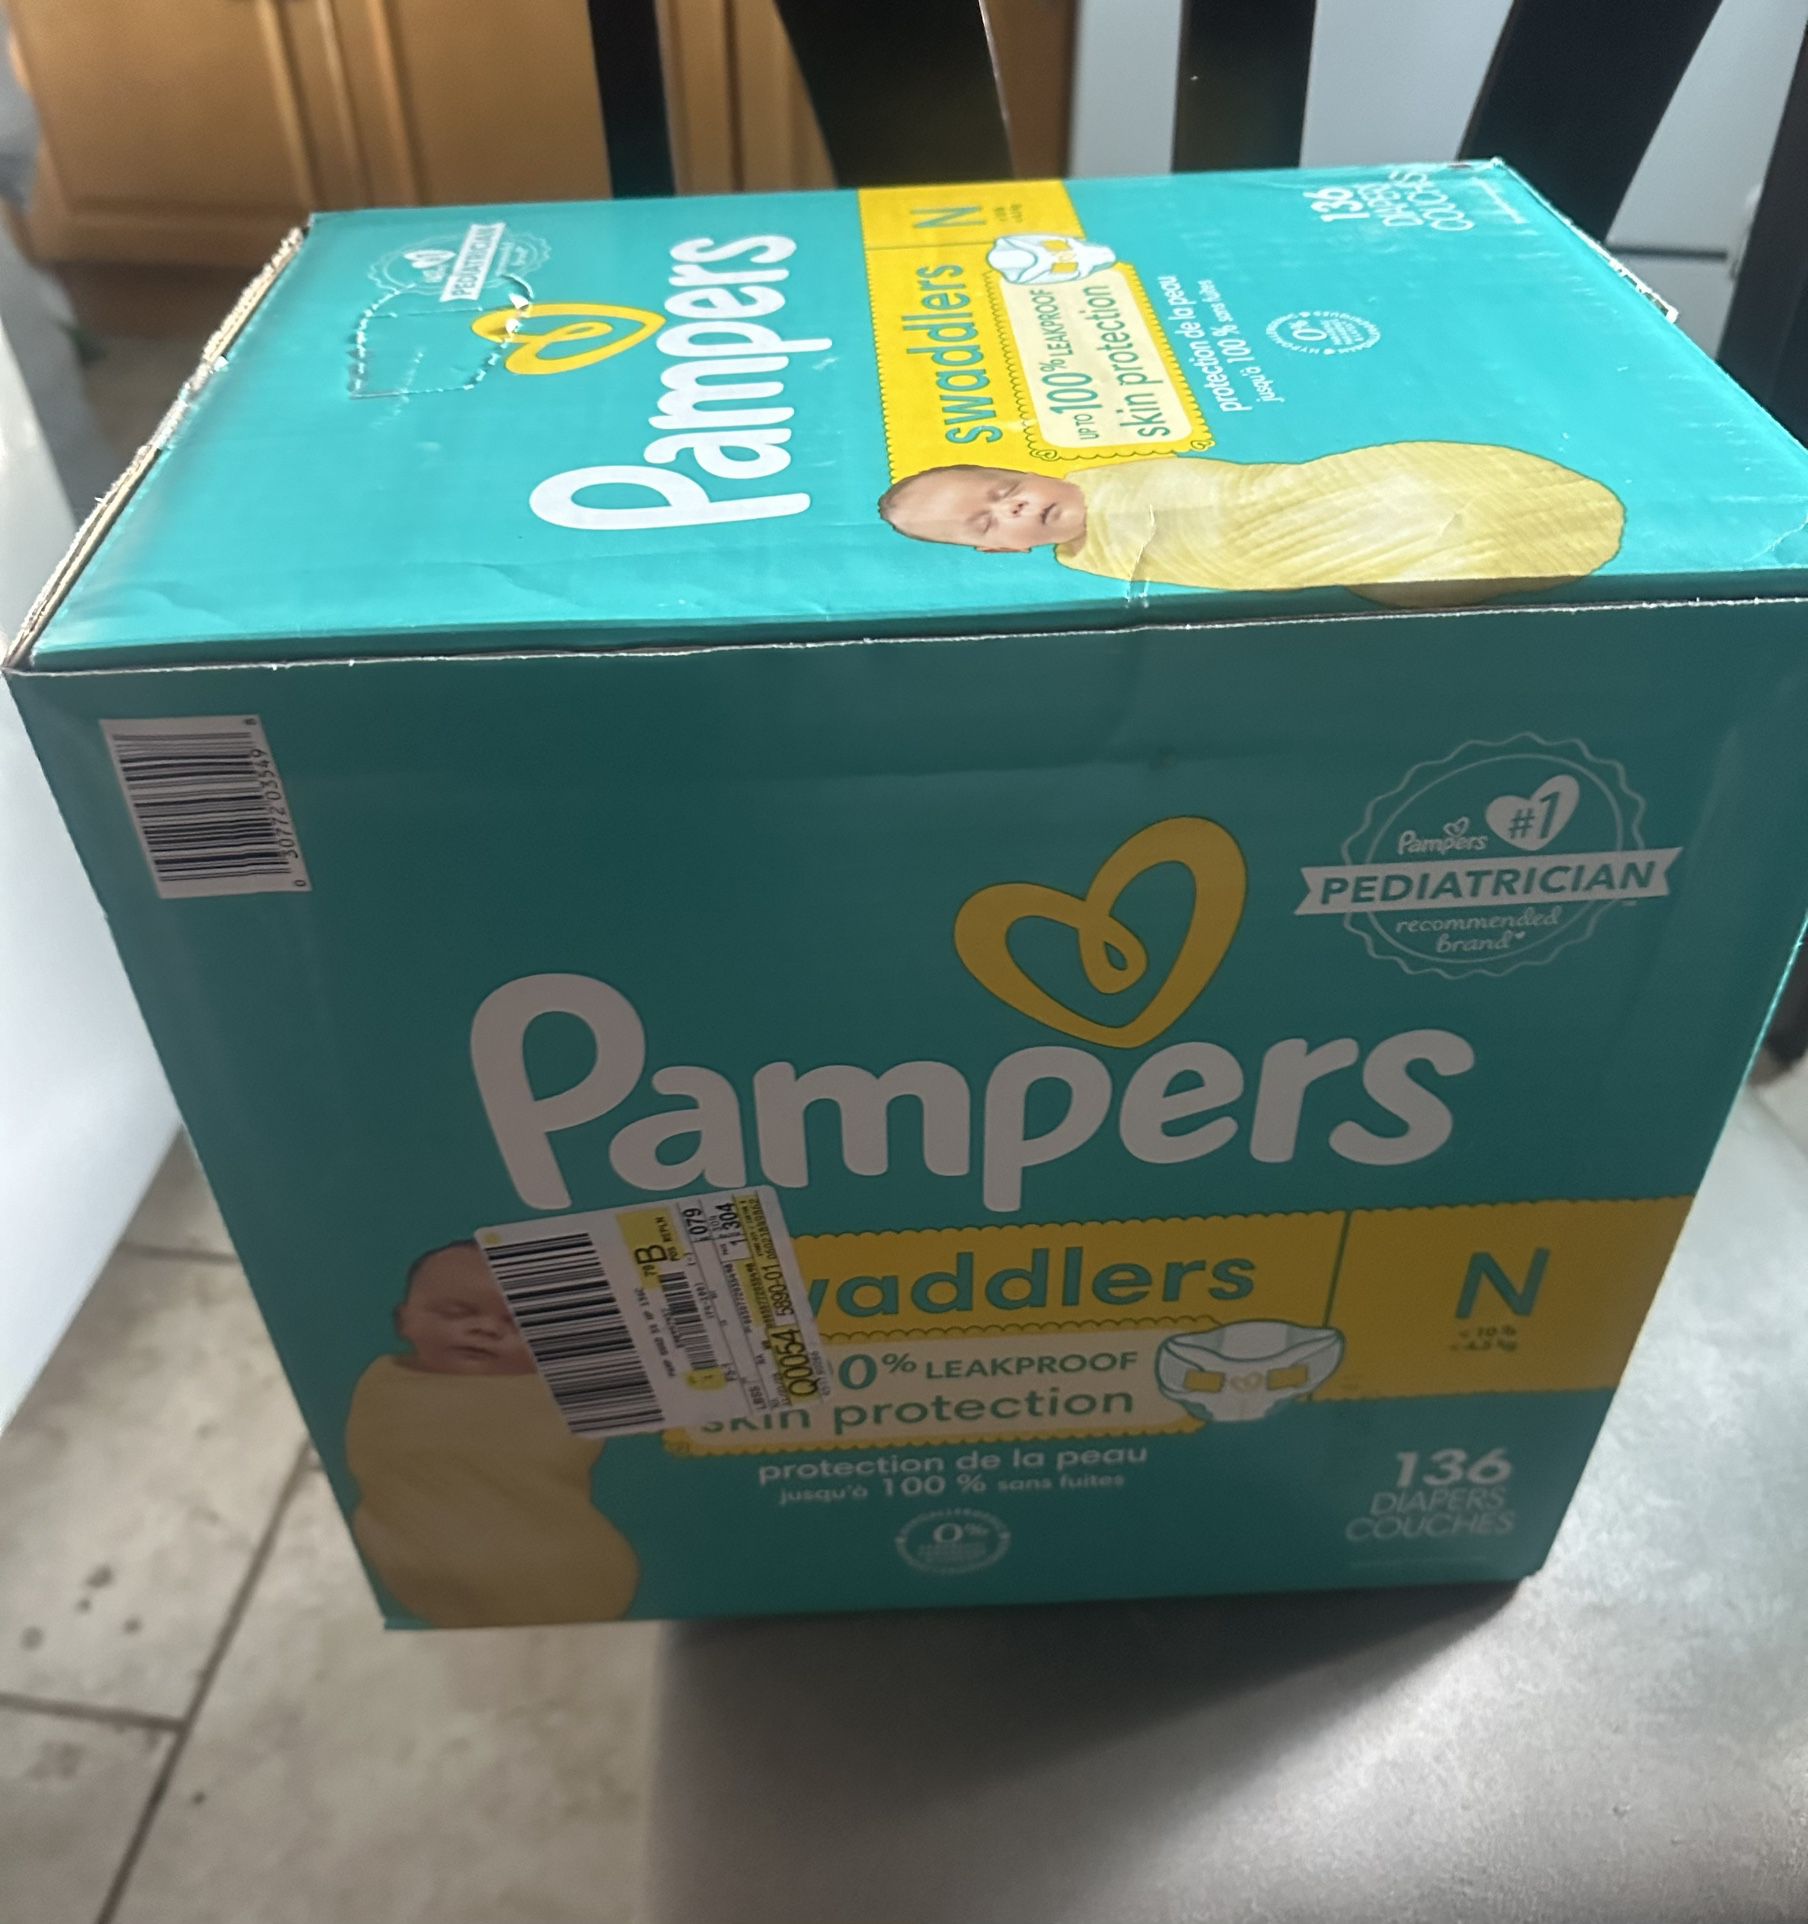 Pampers Newborn Diapers 